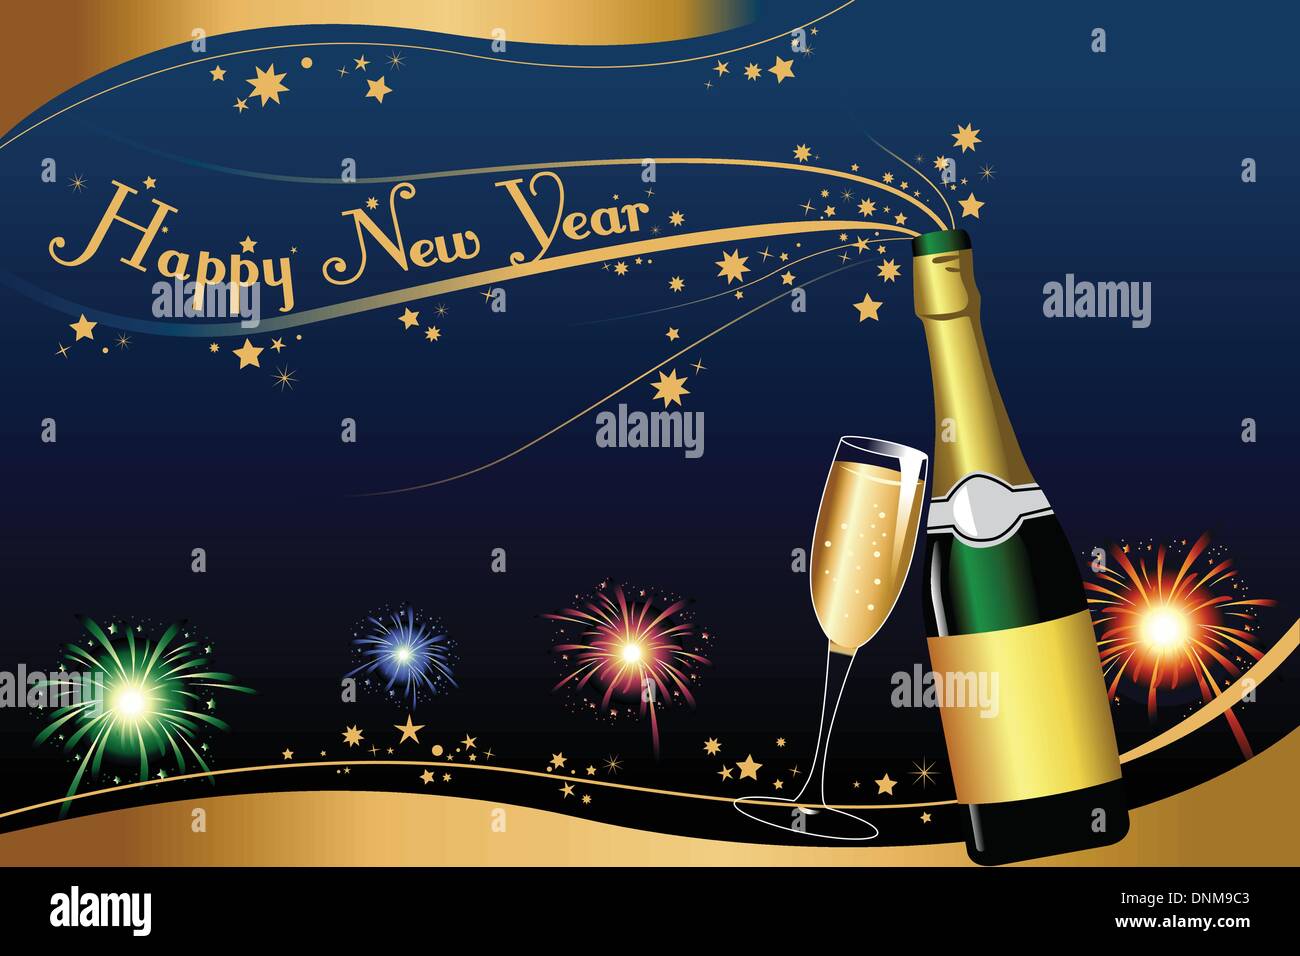 A vector illustration of New Year background with copyspace Stock Vector